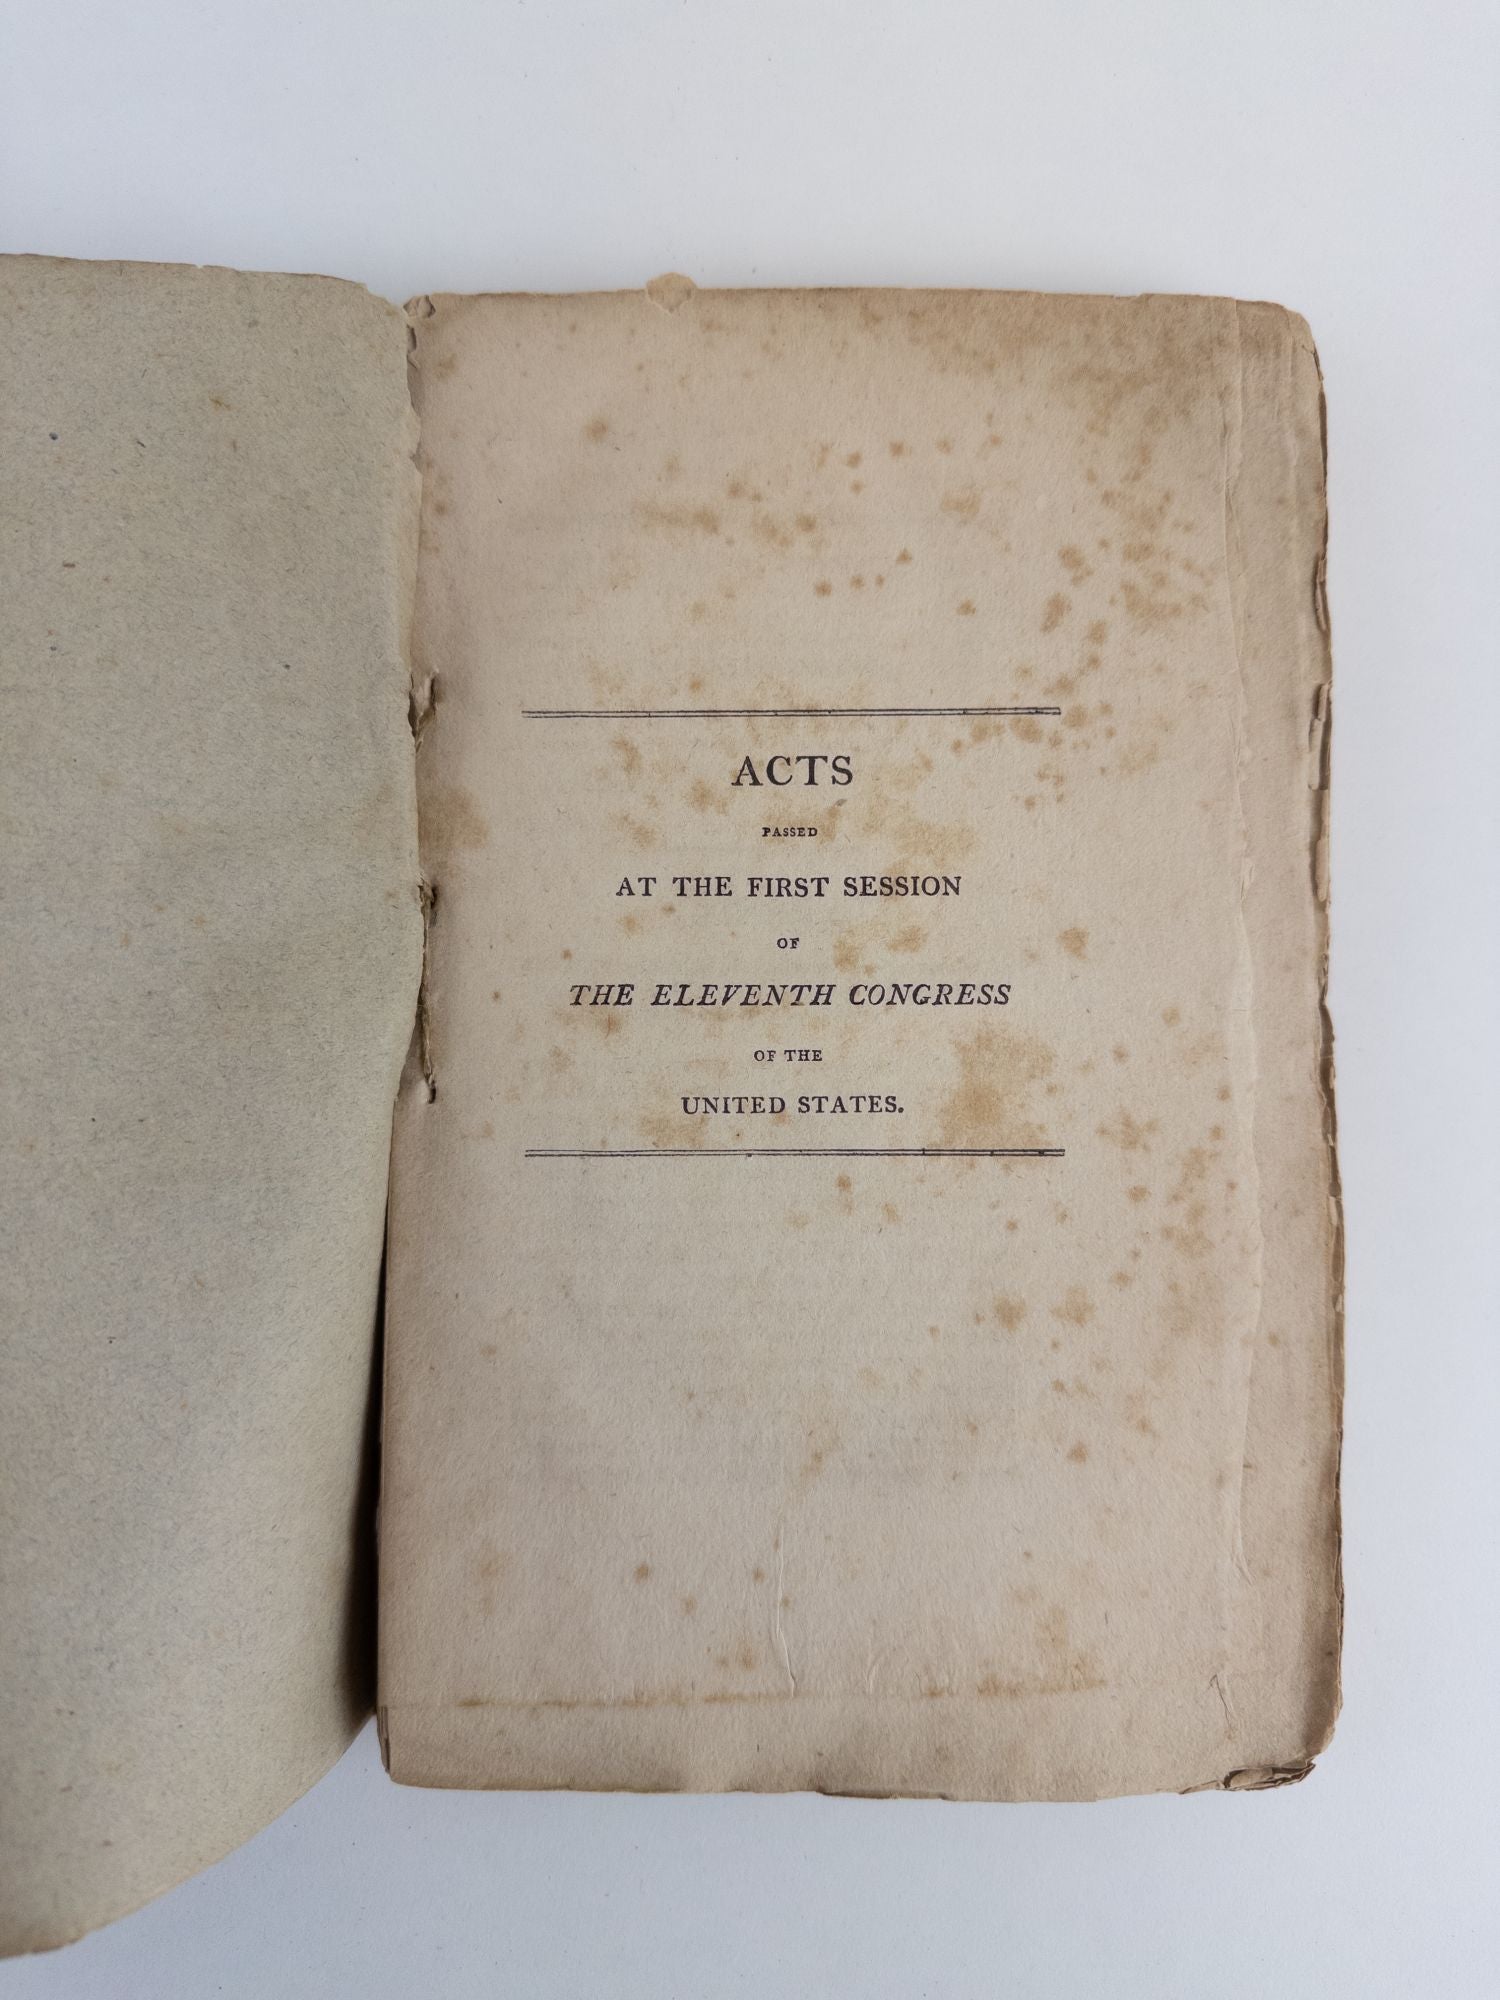 Product Image for Acts Passed By Congress [Early Editions from Eleven Congresses, in Eighteen Books]